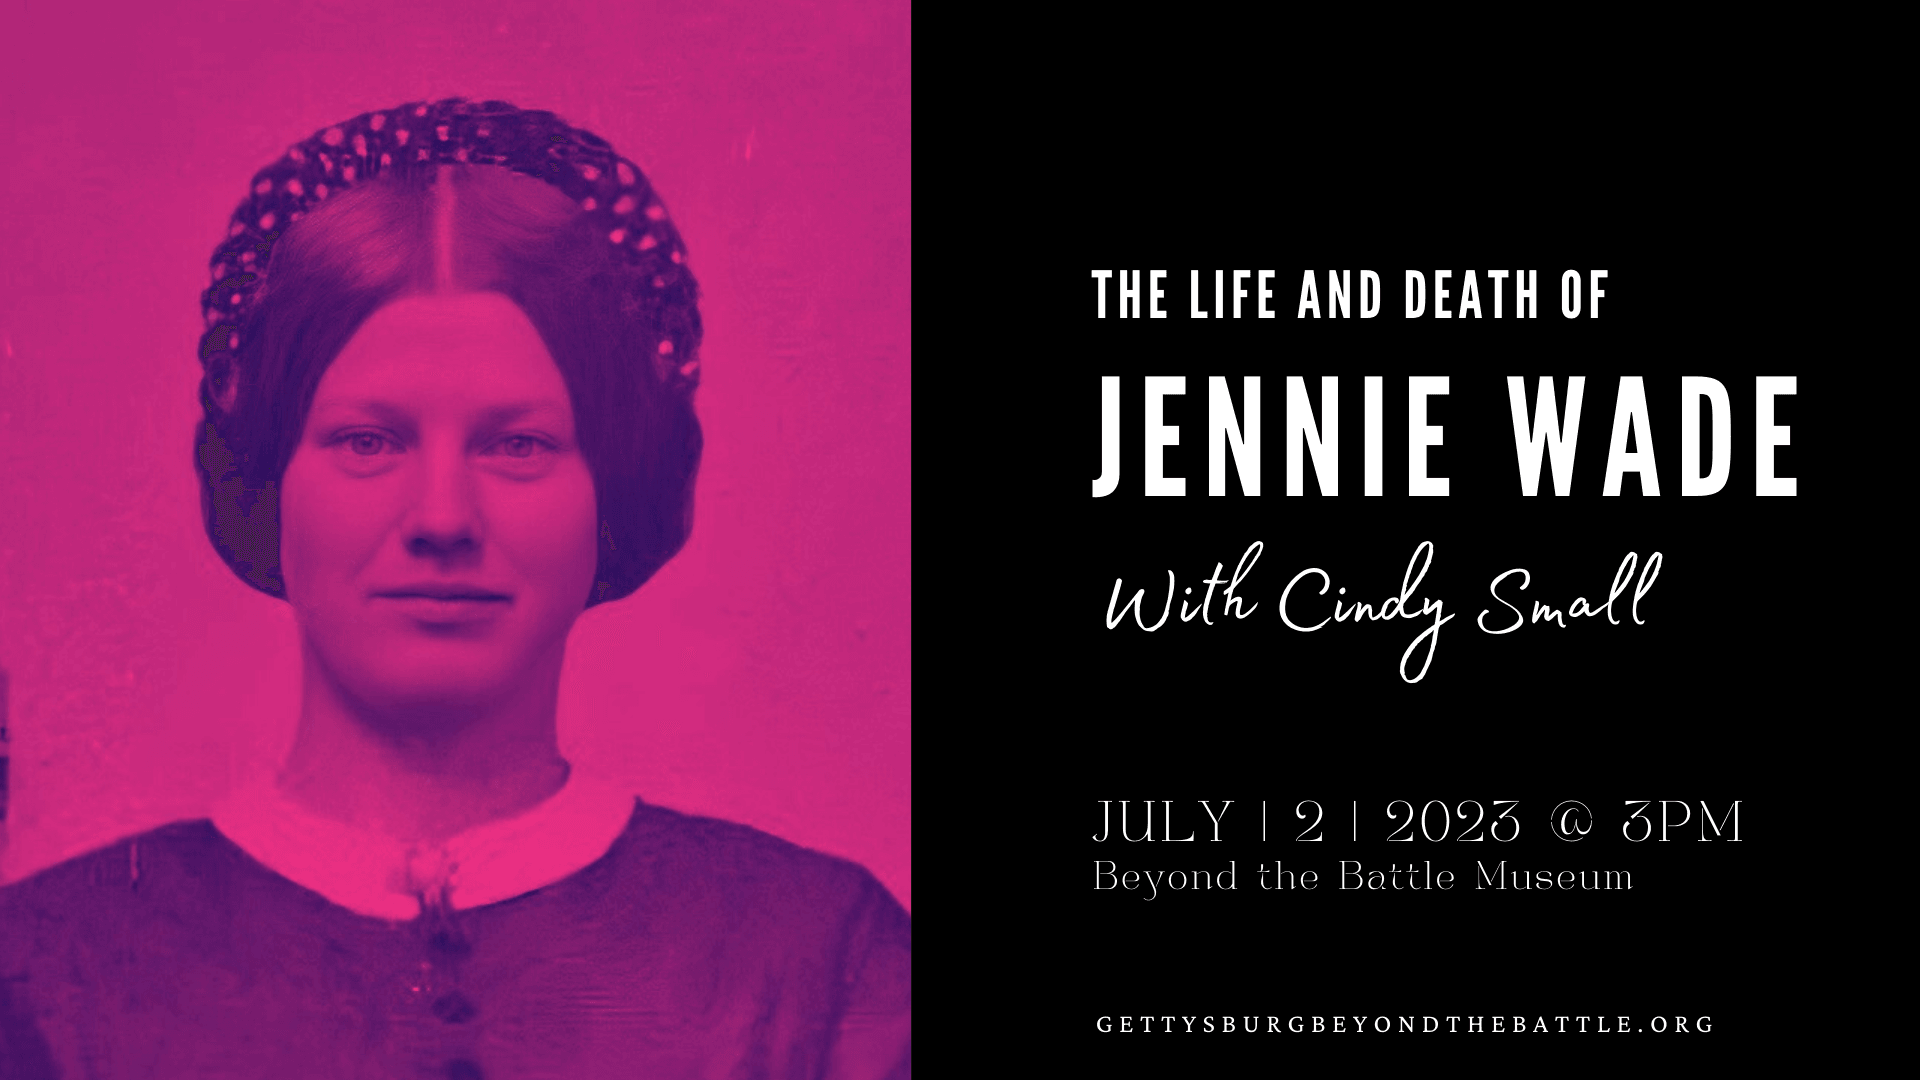 The Life and Death of Jennie Wade